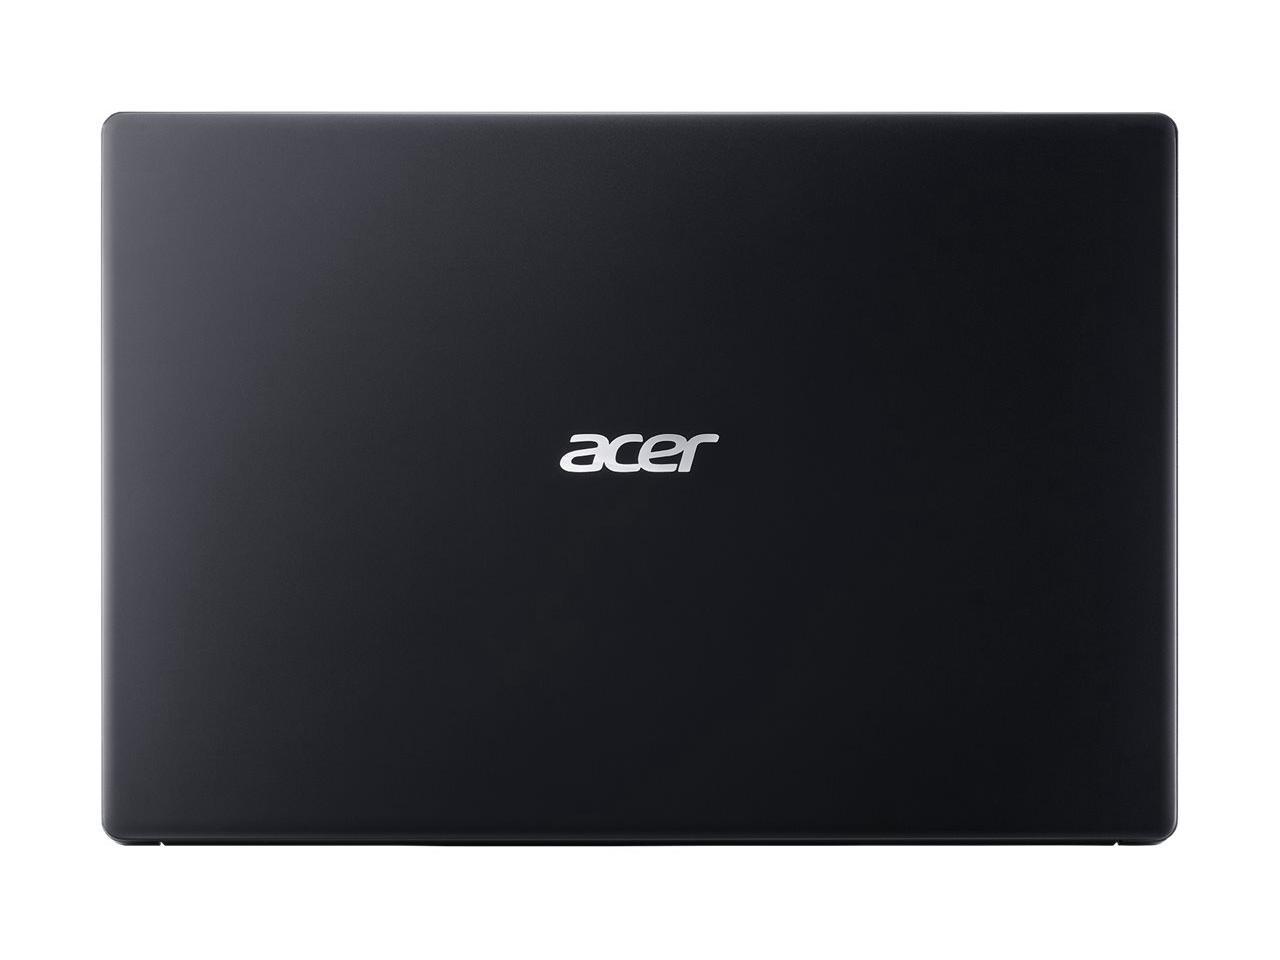 Acer Aspire 3 A315-23-A8GY - 3000 Series 3020E / 1.2 GHz - Windows 10 Home 64-bit in S mode - 4 GB RAM - 128 GB SSD - 15.6" 1366 x 768 (HD) - Radeon Graphics - Wi-Fi - charcoal black